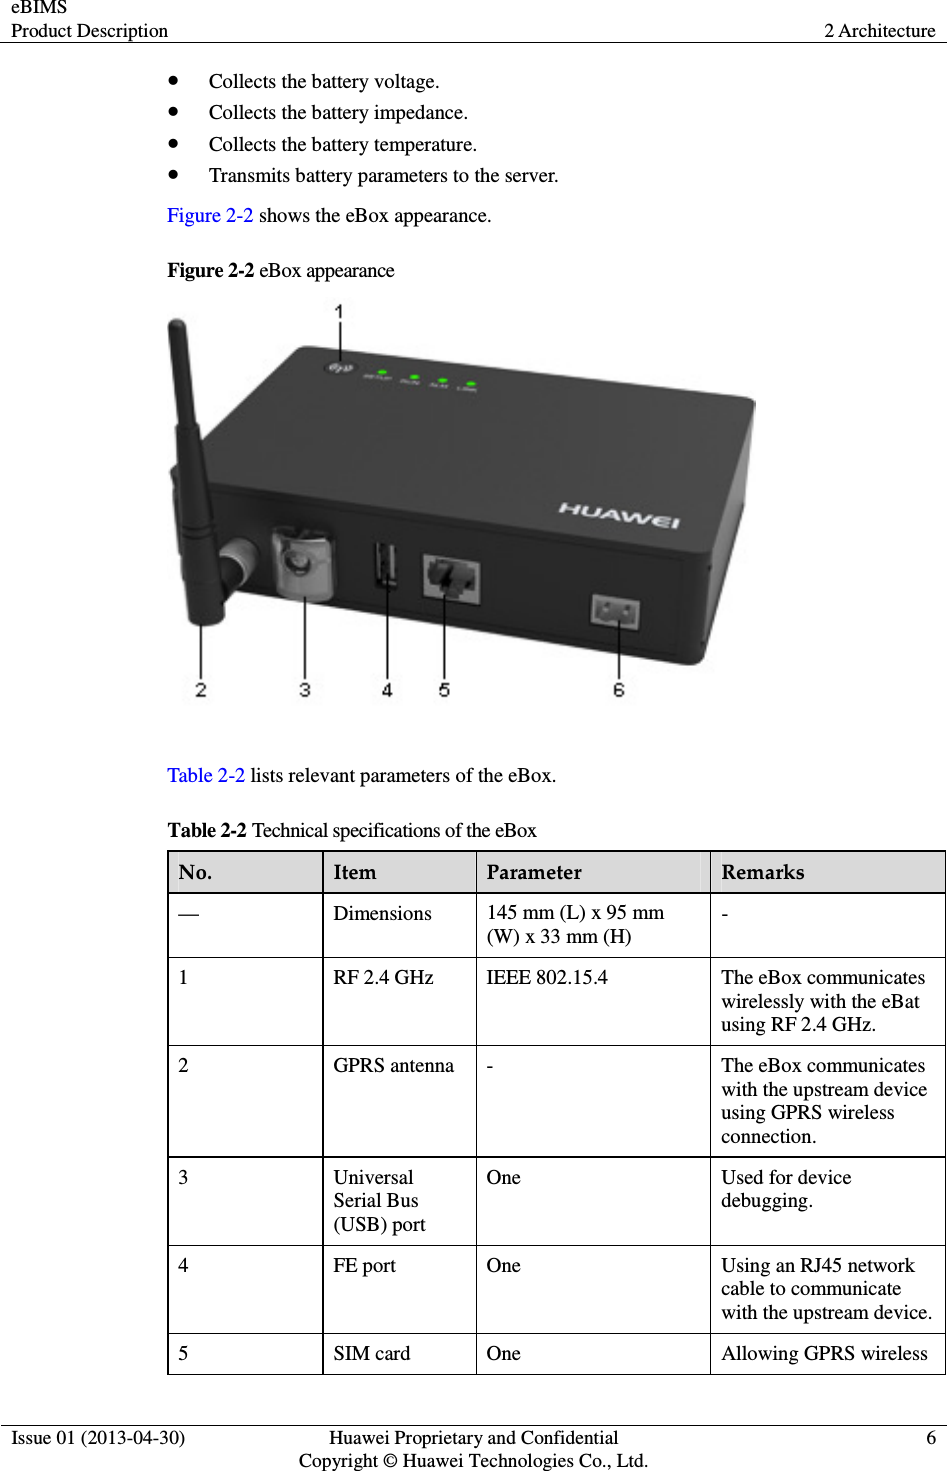 eBIMS Product Description  2 Architecture  Issue 01 (2013-04-30)  Huawei Proprietary and Confidential                                     Copyright © Huawei Technologies Co., Ltd. 6   Collects the battery voltage.  Collects the battery impedance.  Collects the battery temperature.  Transmits battery parameters to the server. Figure 2-2 shows the eBox appearance. Figure 2-2 eBox appearance   Table 2-2 lists relevant parameters of the eBox. Table 2-2 Technical specifications of the eBox No.  Item  Parameter  Remarks —  Dimensions  145 mm (L) x 95 mm (W) x 33 mm (H) - 1  RF 2.4 GHz  IEEE 802.15.4  The eBox communicates wirelessly with the eBat using RF 2.4 GHz. 2  GPRS antenna  -  The eBox communicates with the upstream device using GPRS wireless connection. 3  Universal Serial Bus (USB) port One  Used for device debugging. 4  FE port  One  Using an RJ45 network cable to communicate with the upstream device. 5  SIM card  One  Allowing GPRS wireless 